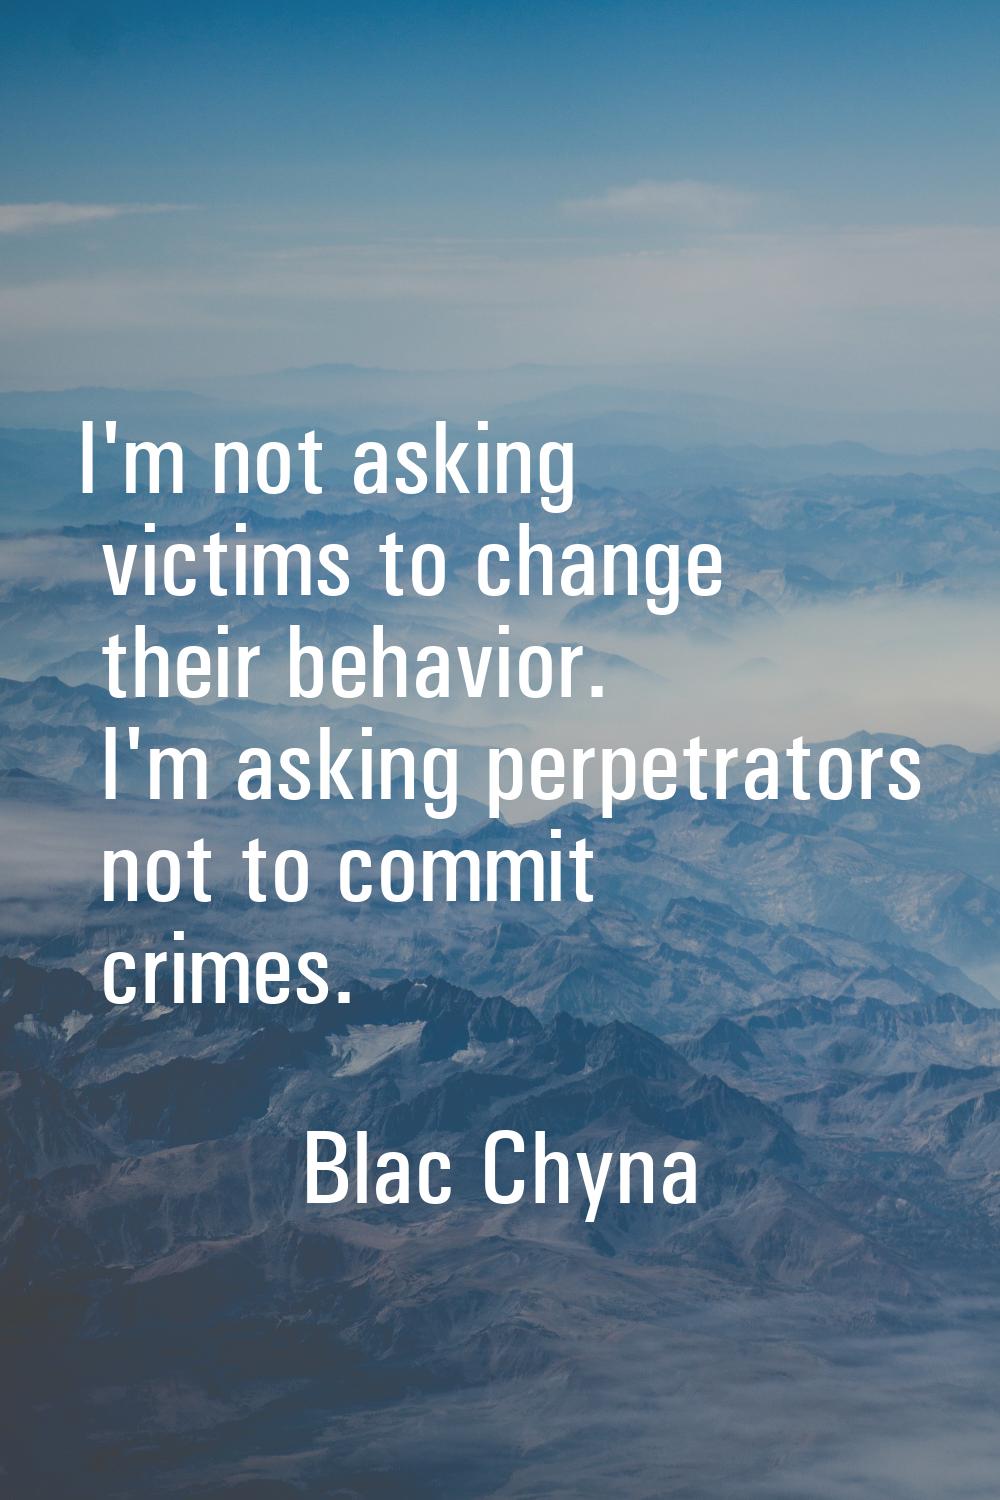 I'm not asking victims to change their behavior. I'm asking perpetrators not to commit crimes.